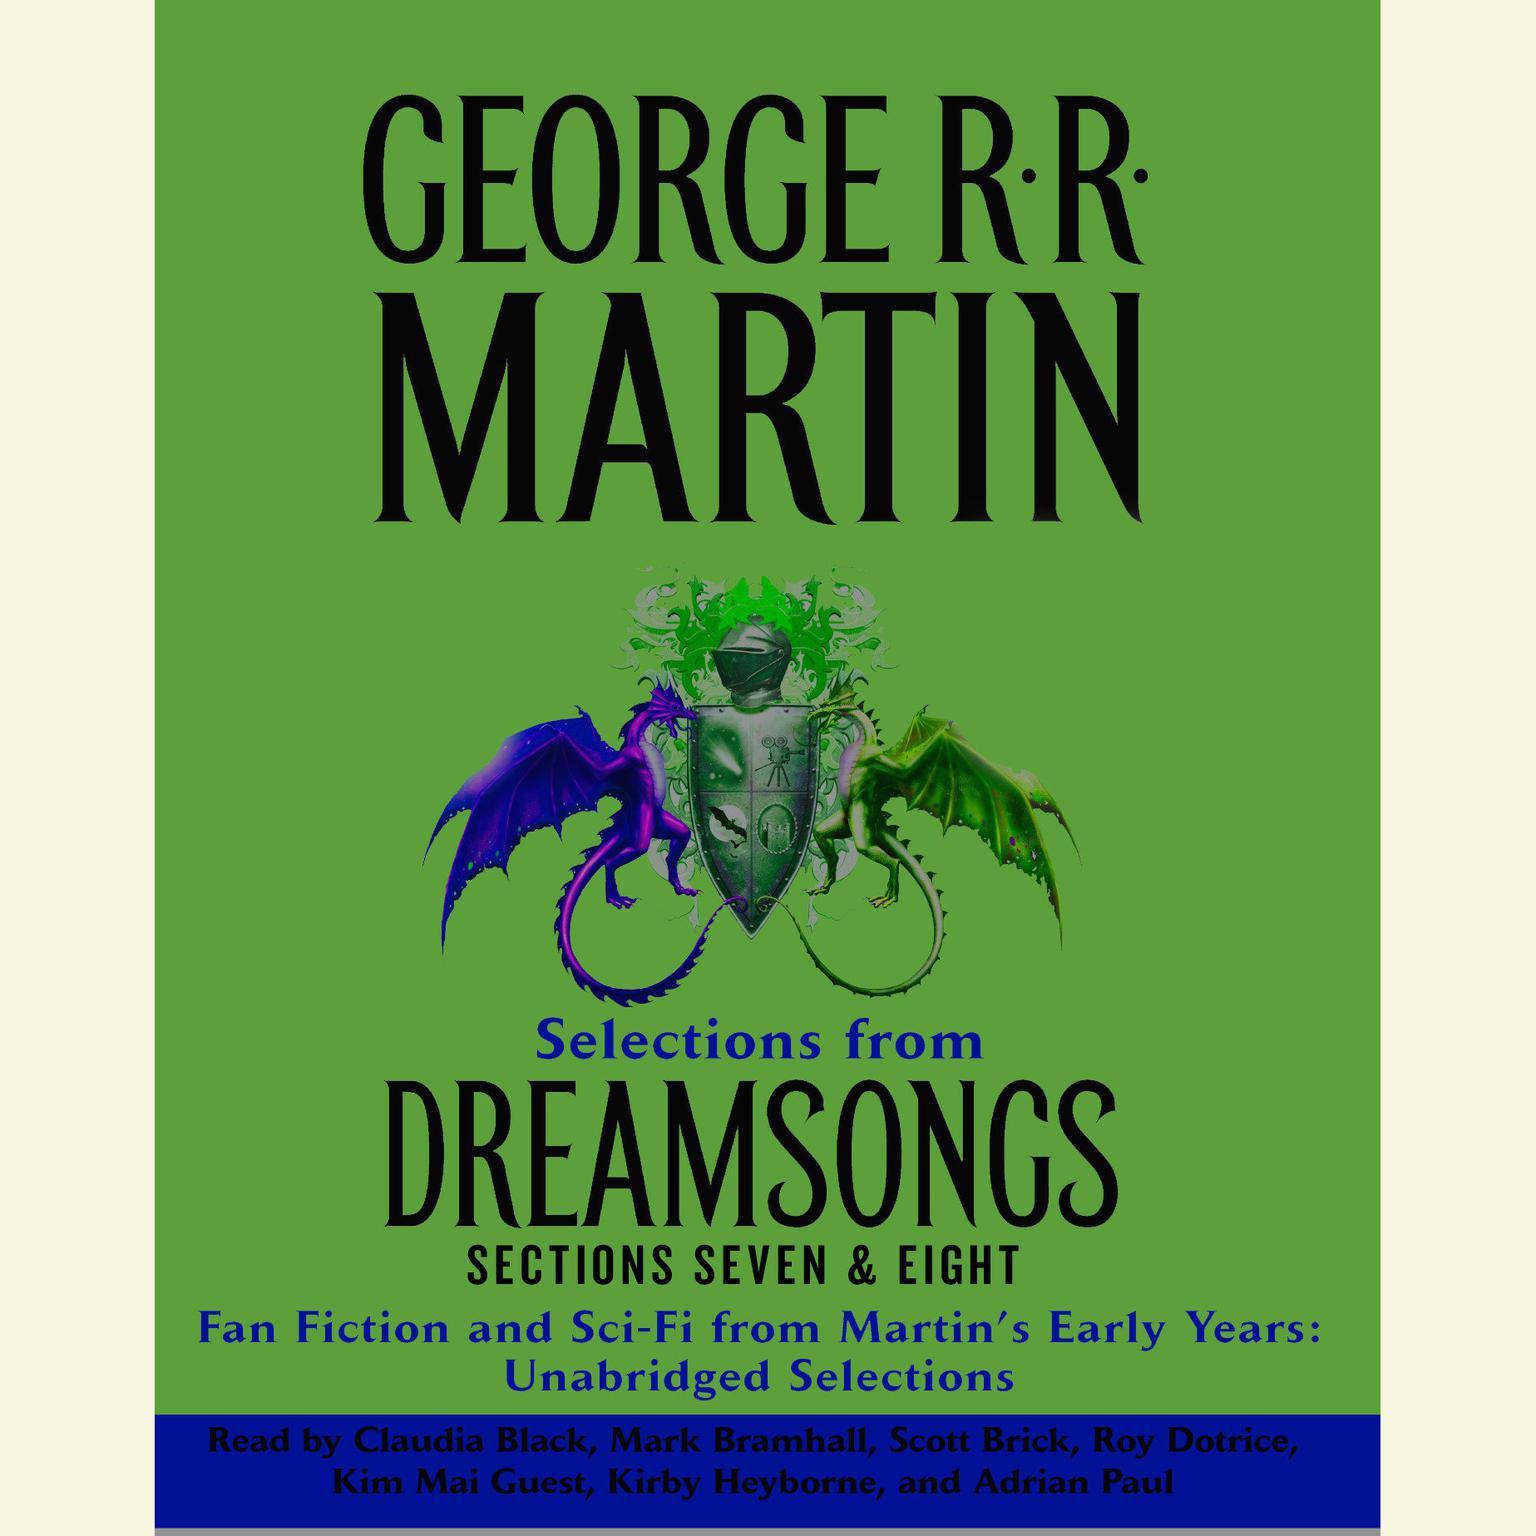 Dreamsongs Sections 7 & 8: The Siren Song of Hollywood & Doing the Wild Card Shuffle: The Siren Song of Hollywood & Doing the Wild Card Shuffle Audiobook, by George R. R. Martin